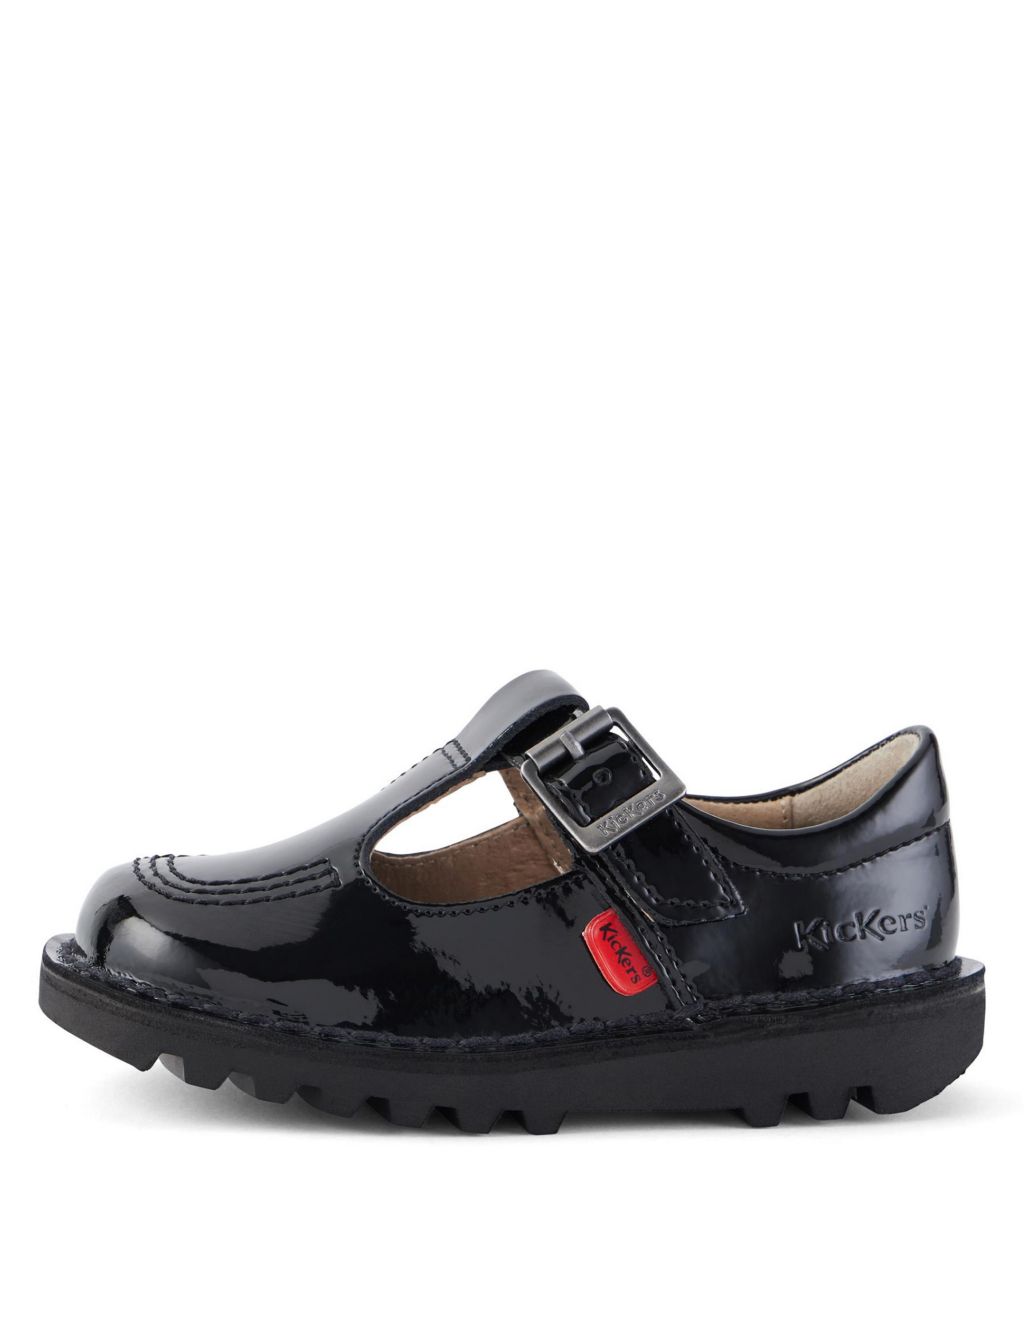 Kids' Patent Leather School Shoes